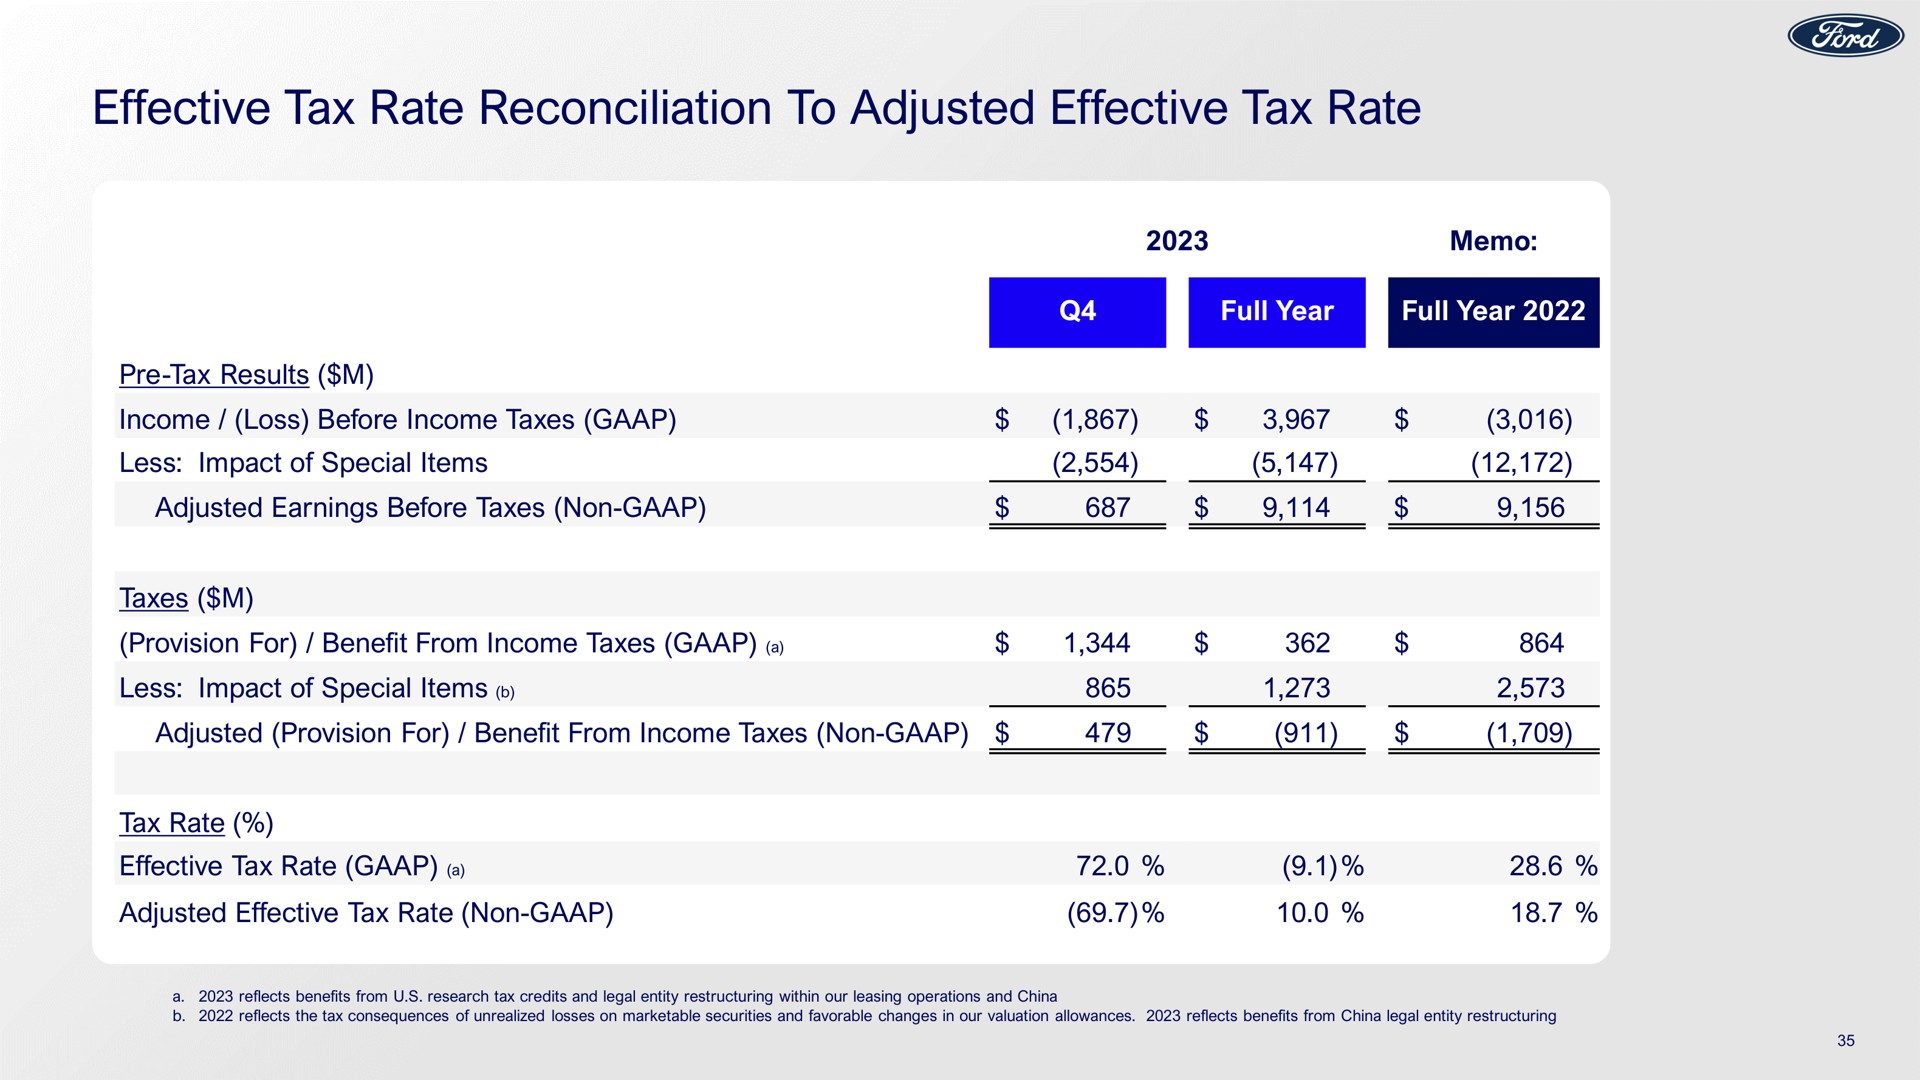 effective tax rate reconciliation to adjusted effective tax rate | Ford